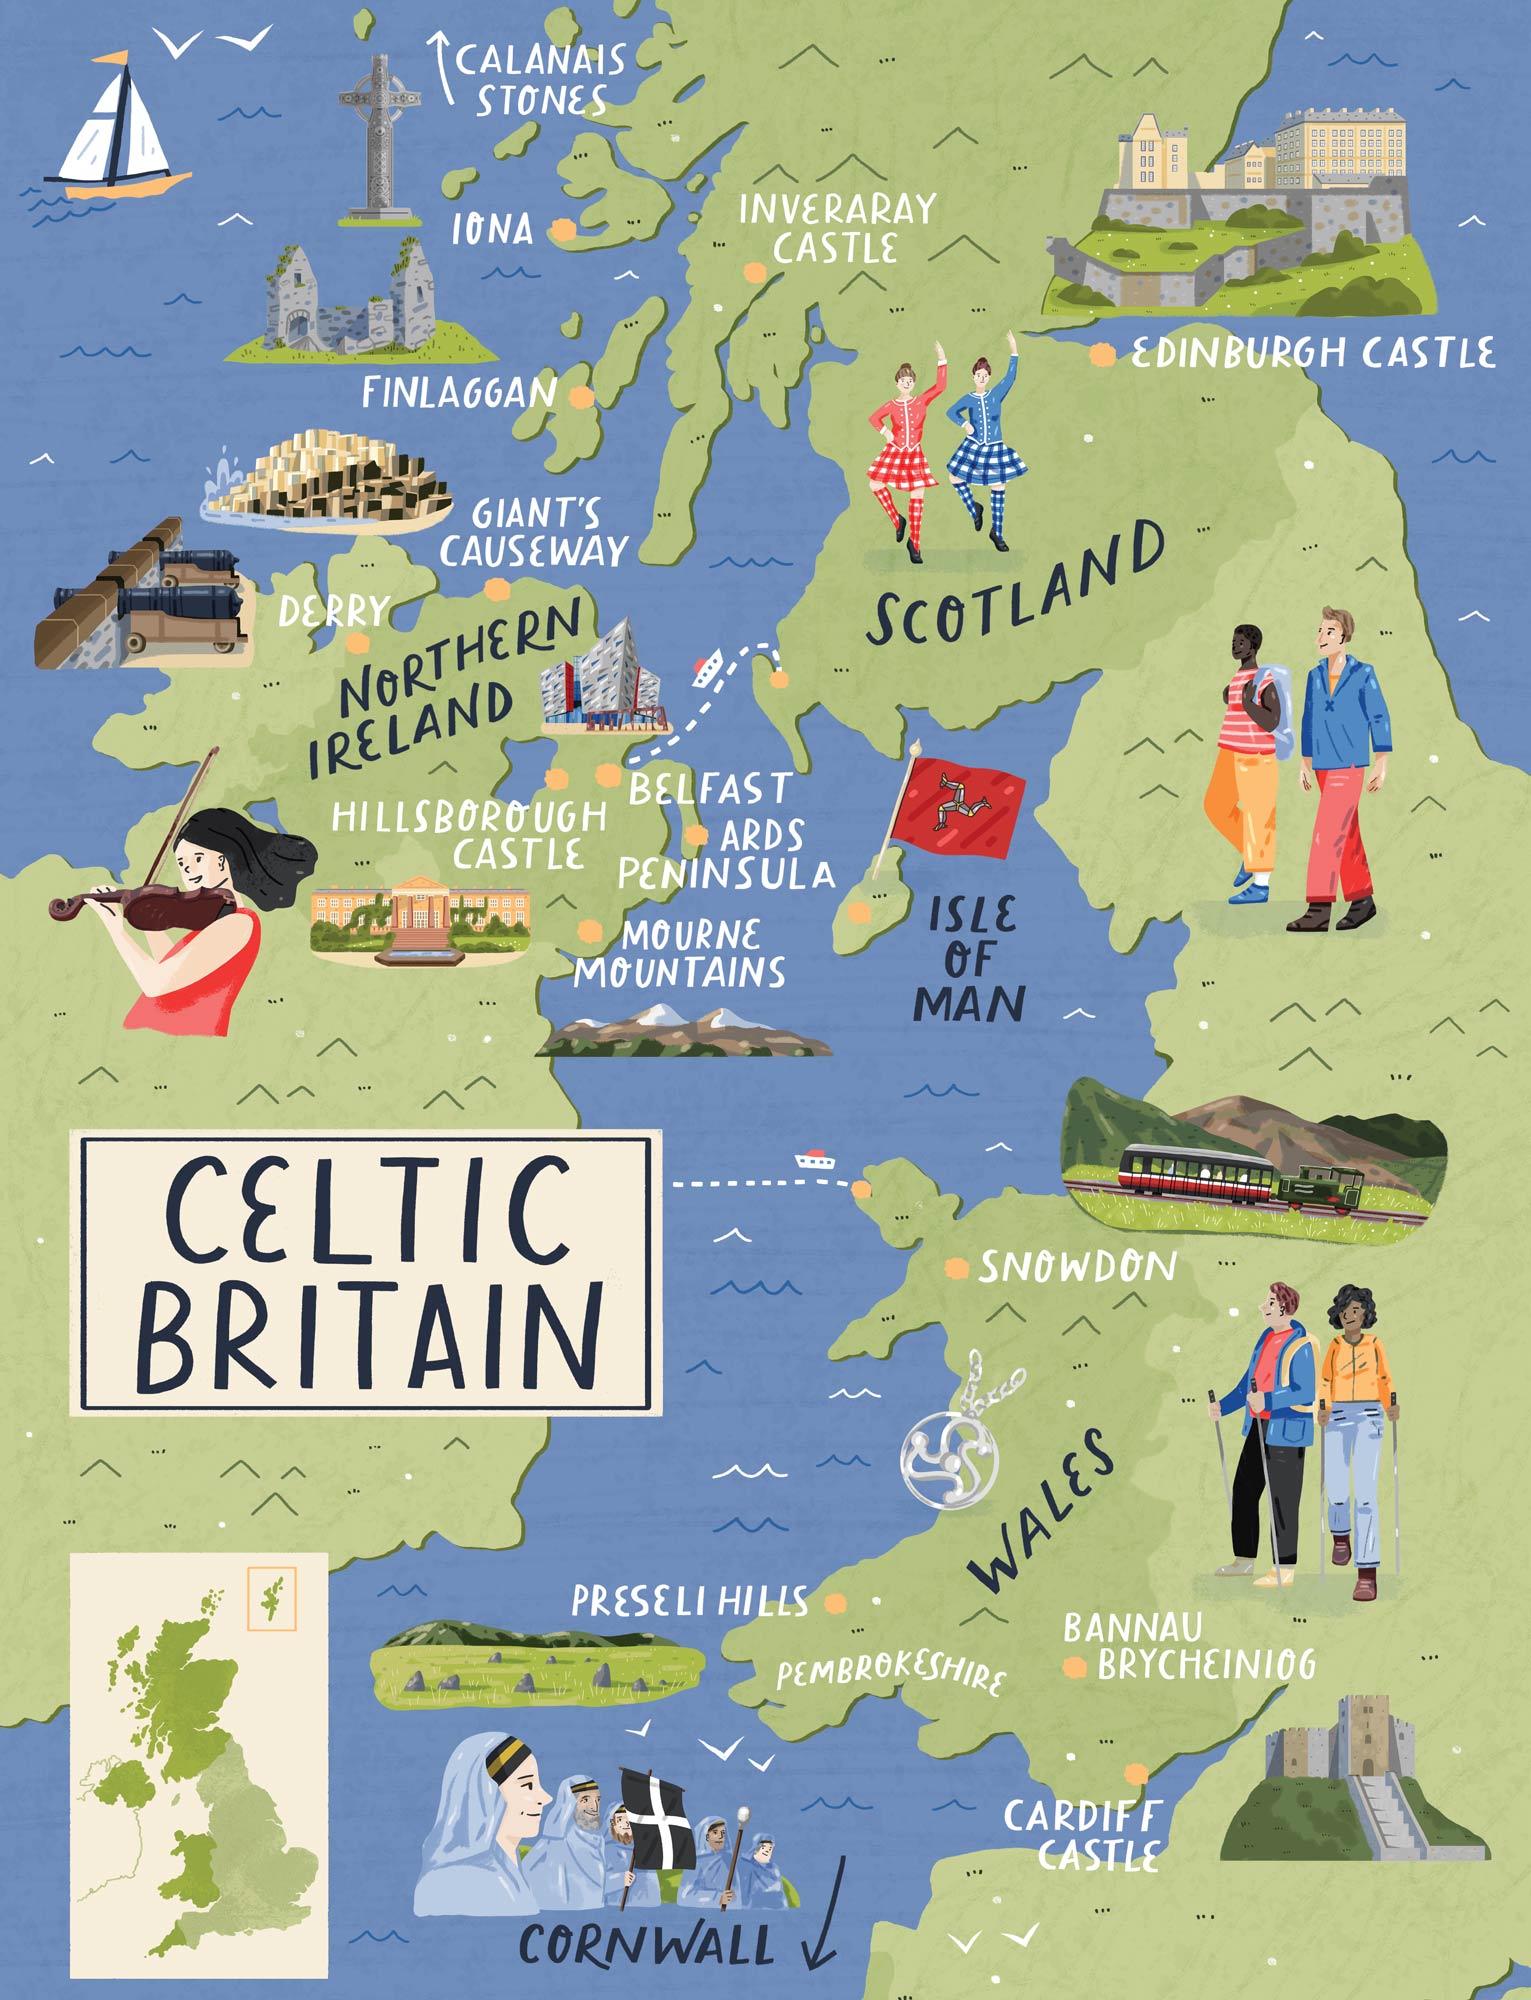 Map of Celtic Britain for Discover Britain Magazine, by Elly Jahnz